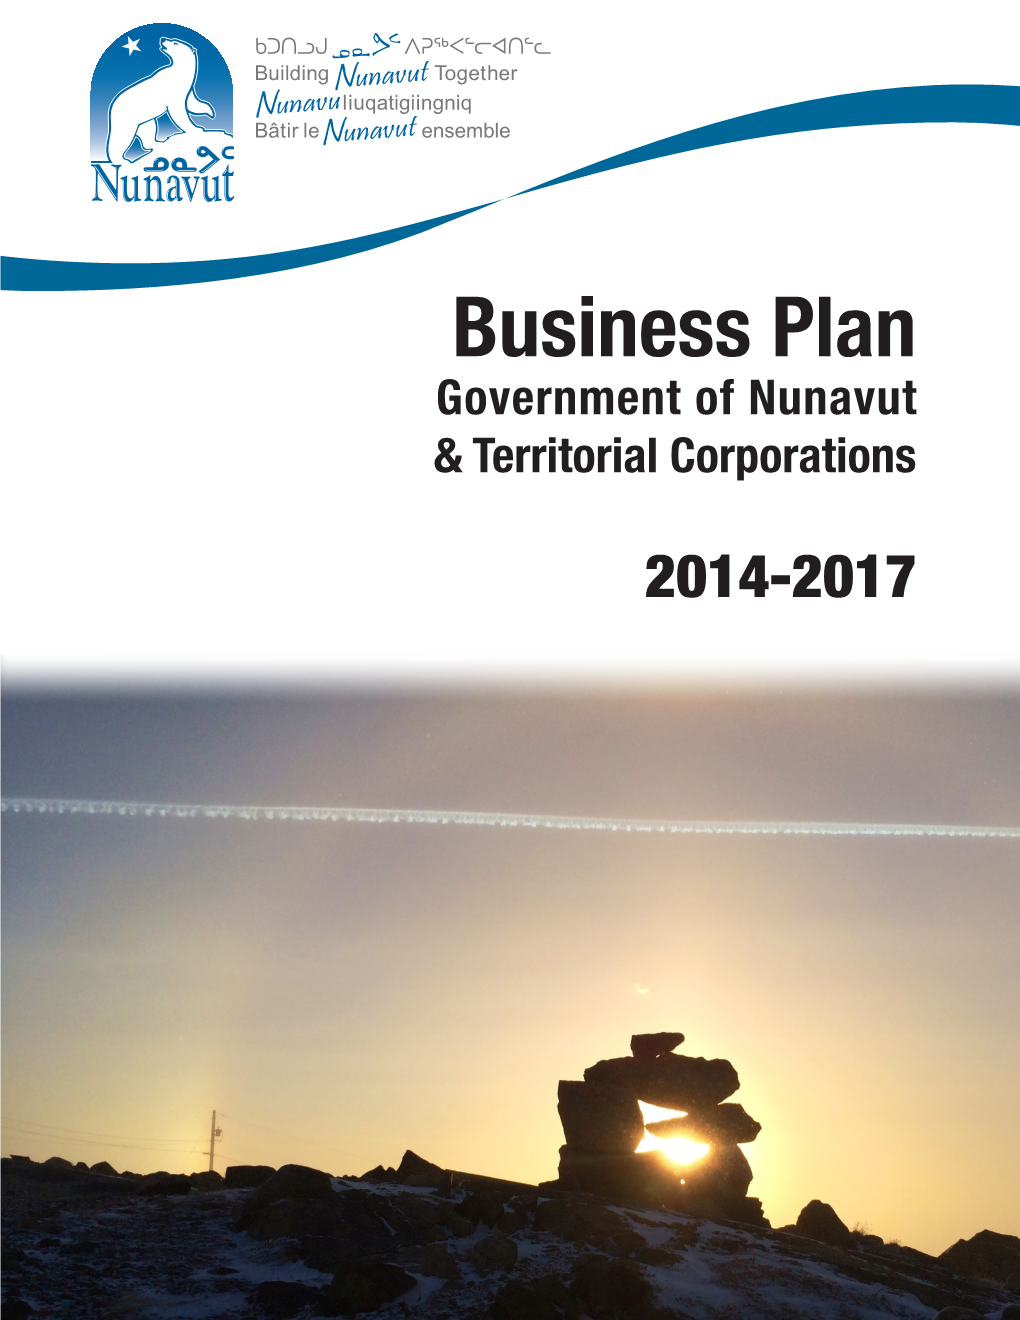 Business Plan Government of Nunavut & Territorial Corporations